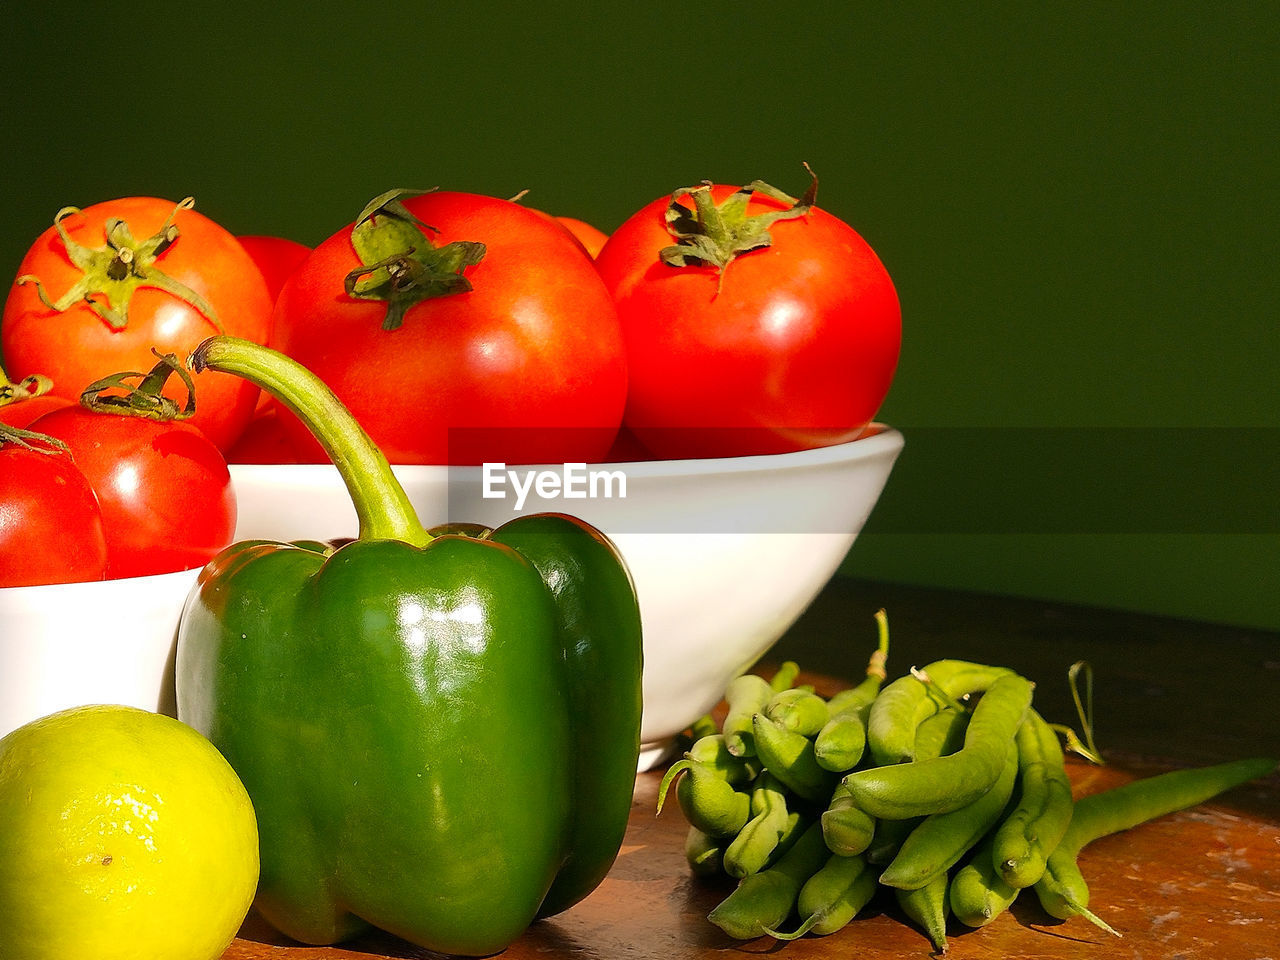 Close-up of tomatoes and green vegetables on table